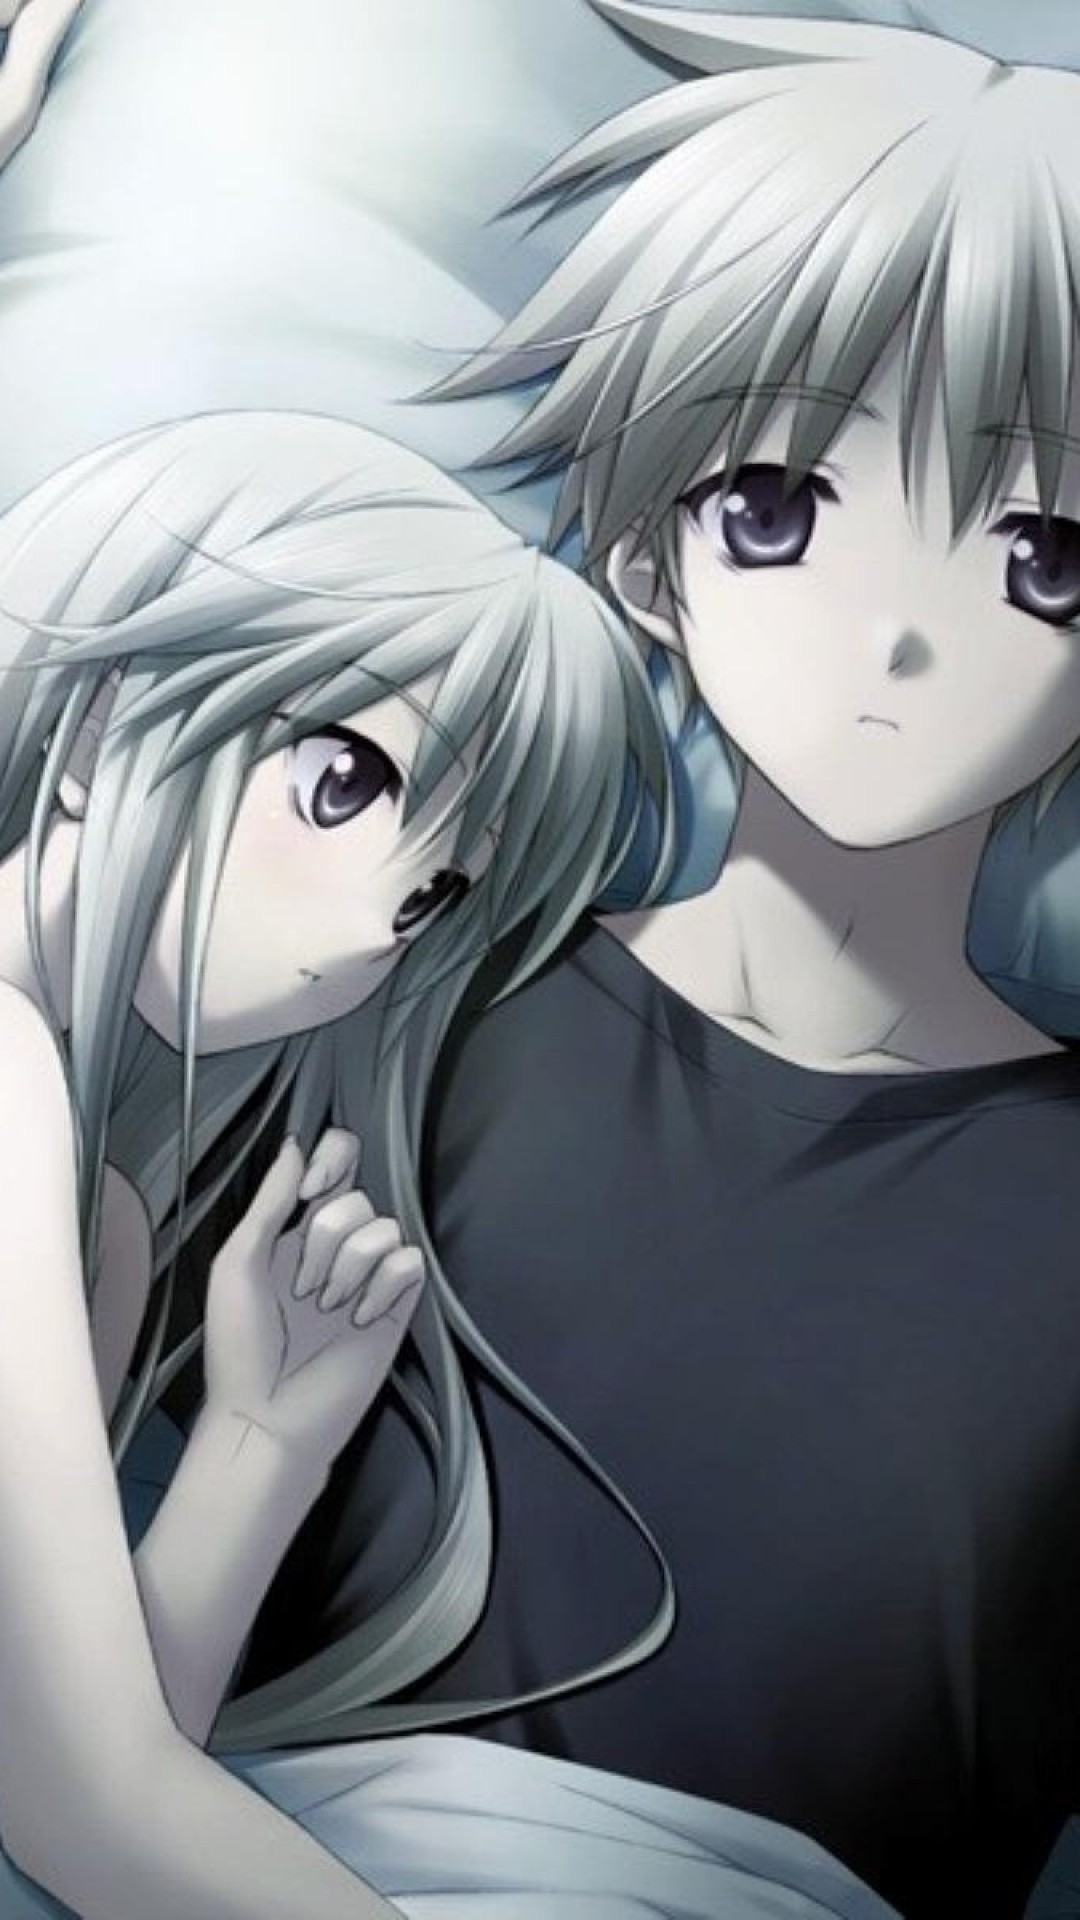 Wallpaper 4k Embraced And Endeared Anime Couple Wallpaper